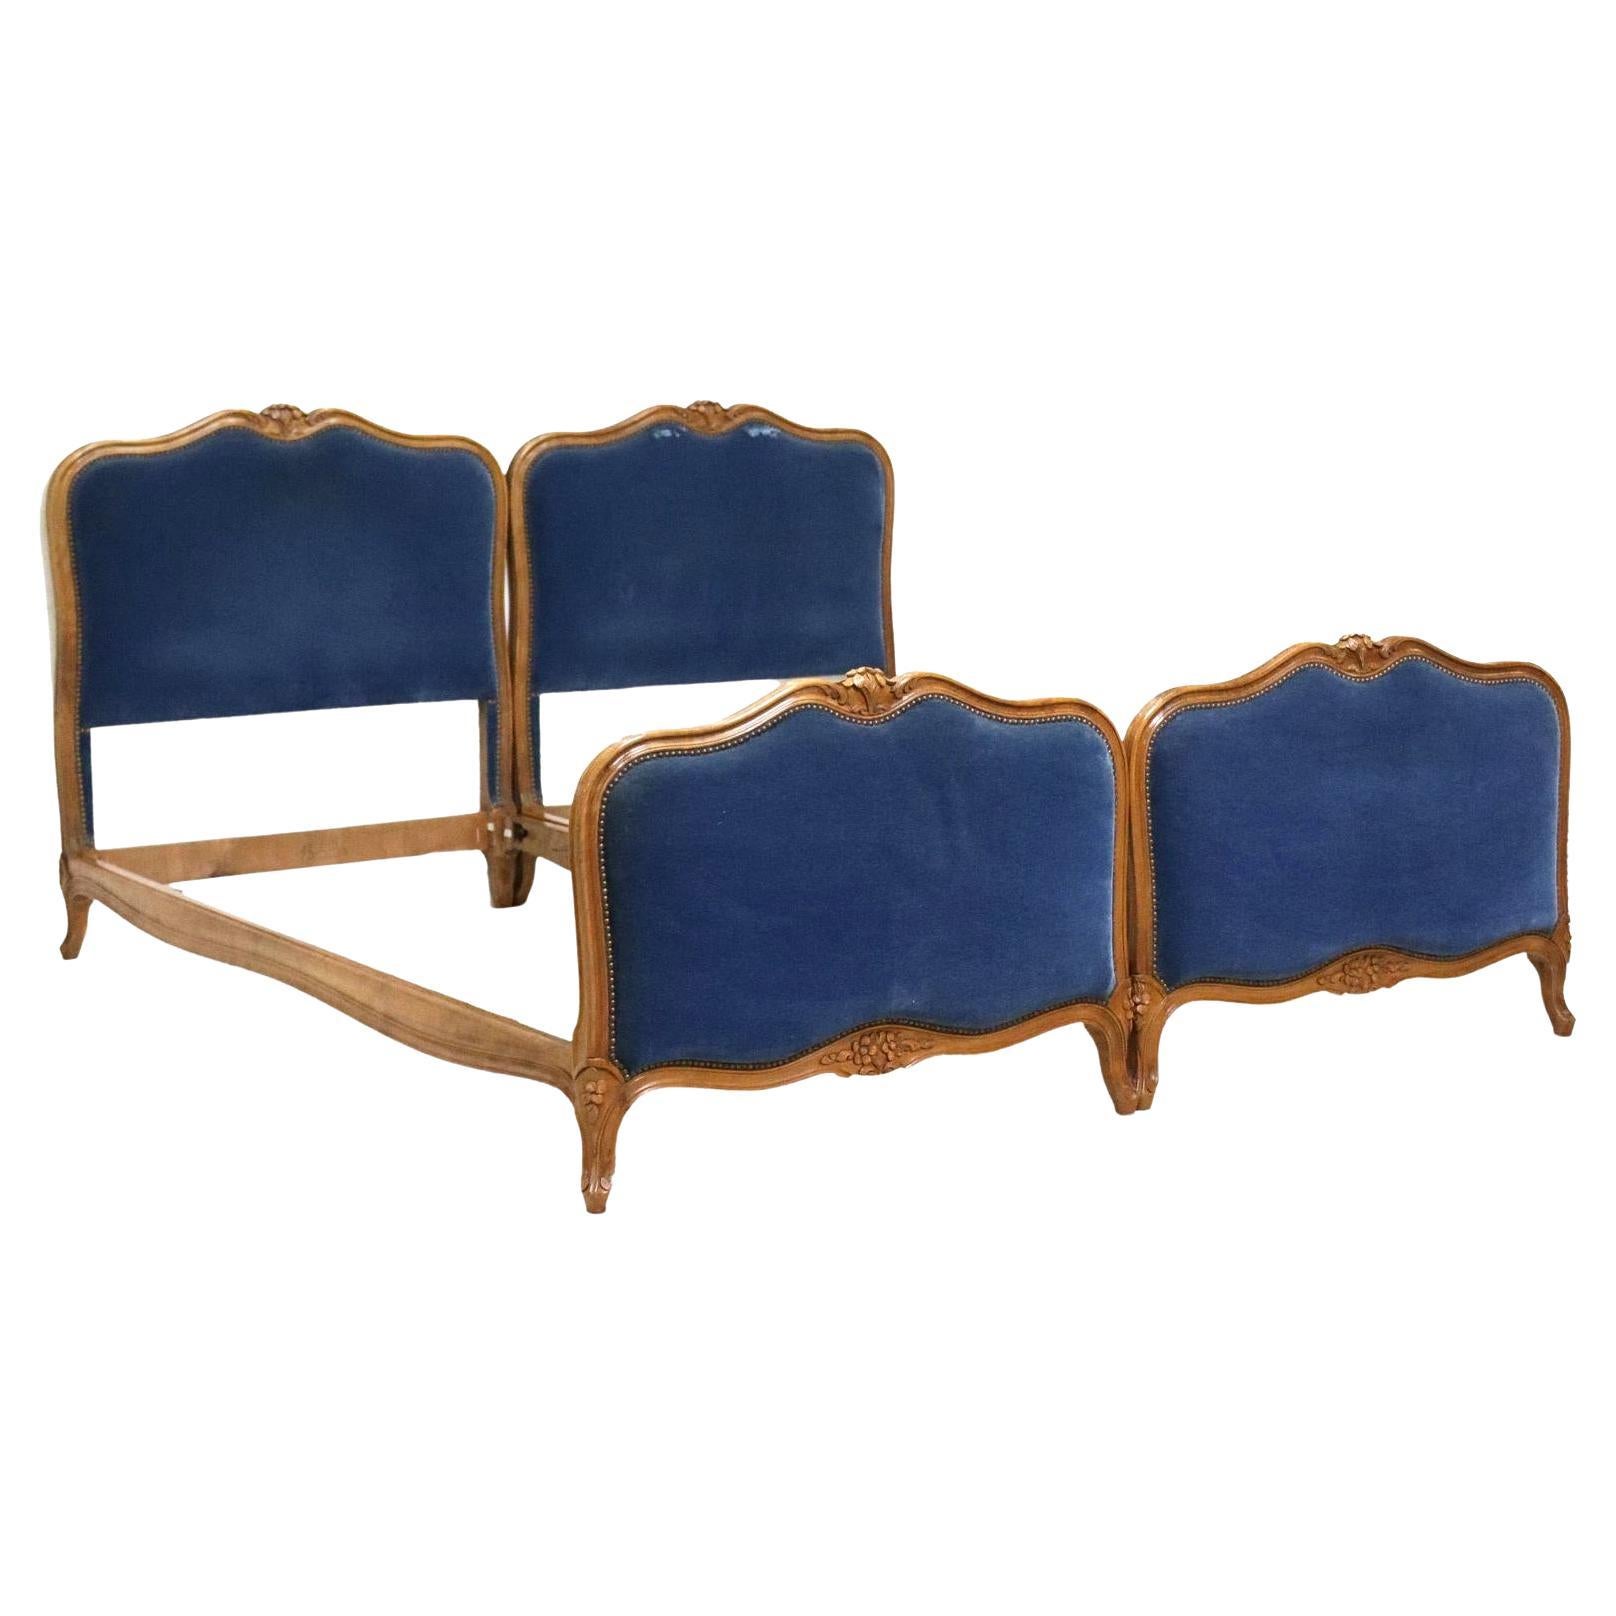 Antique French Louis XV Style Blue Velvet Upholstered Twin Beds, a Pair For Sale